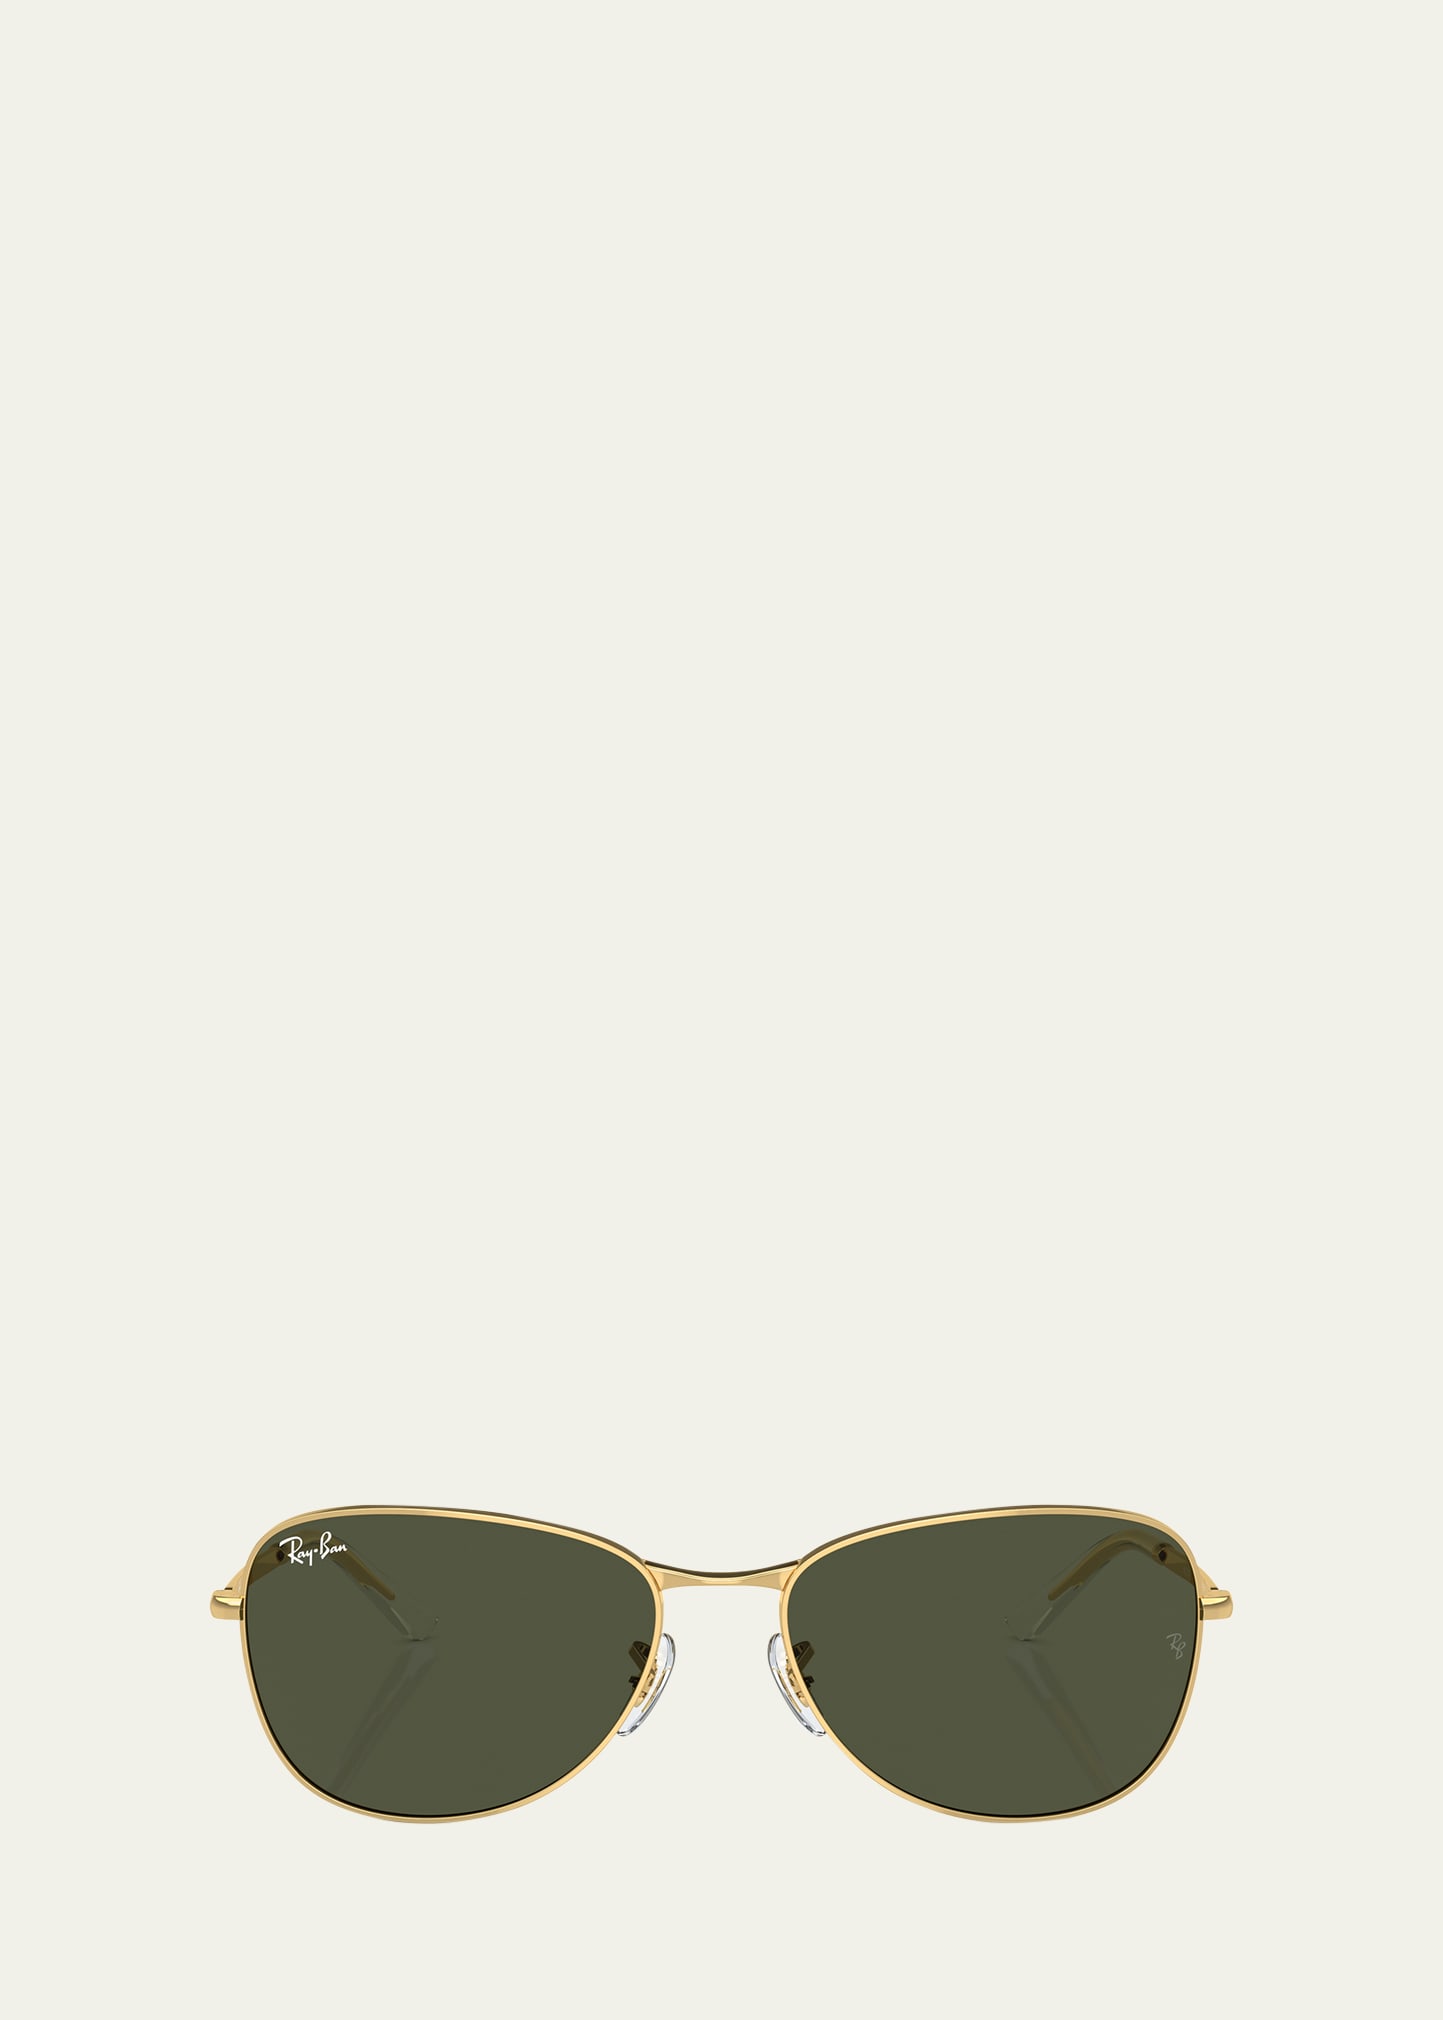 Rounded Metal Square Sunglasses, 59mm